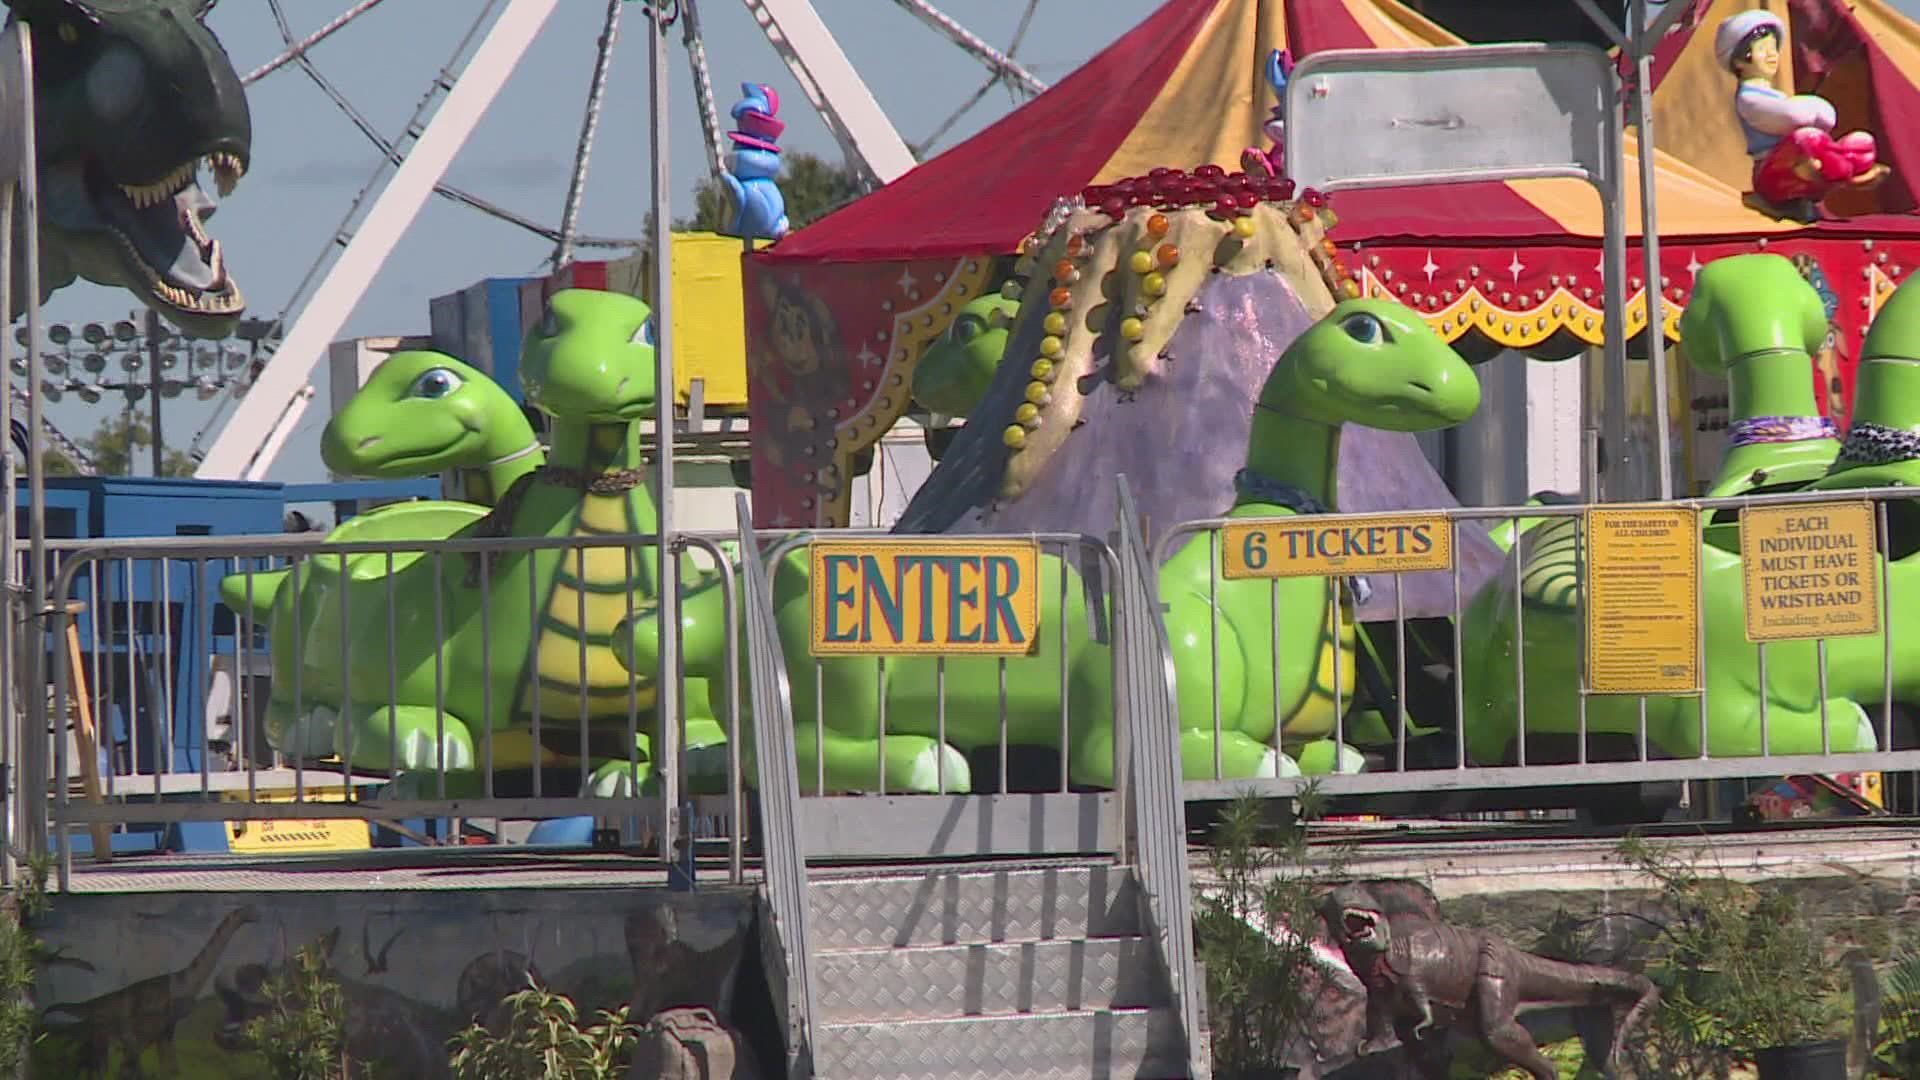 The fair opens the same day that the Triad is expected to get hit with rain from Hurricane Ian.